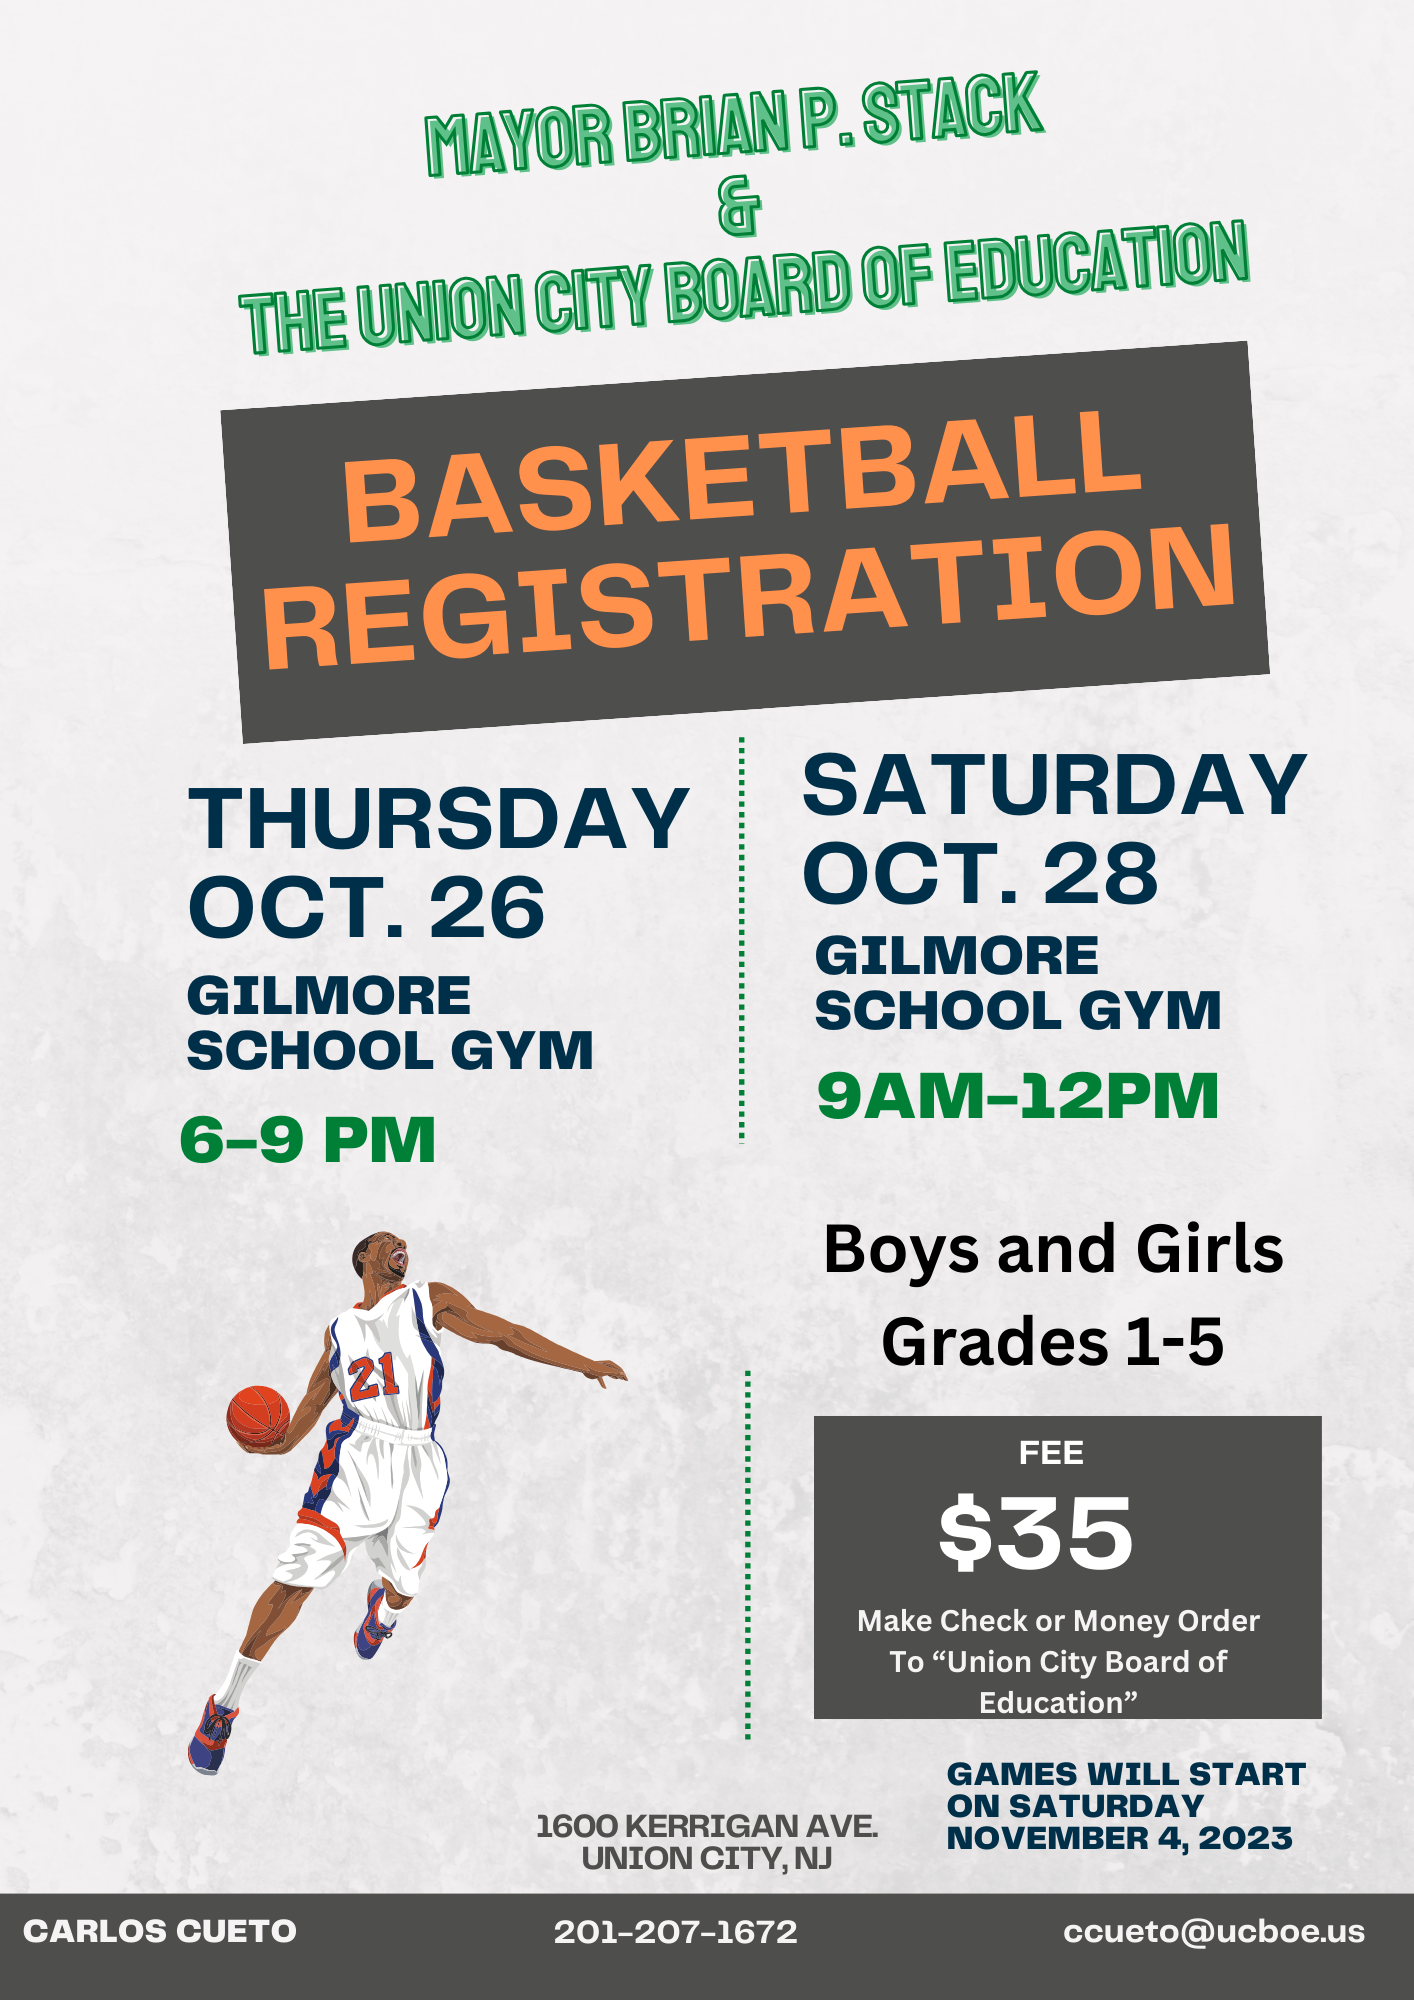 Basketball Registration at the Gilmore School